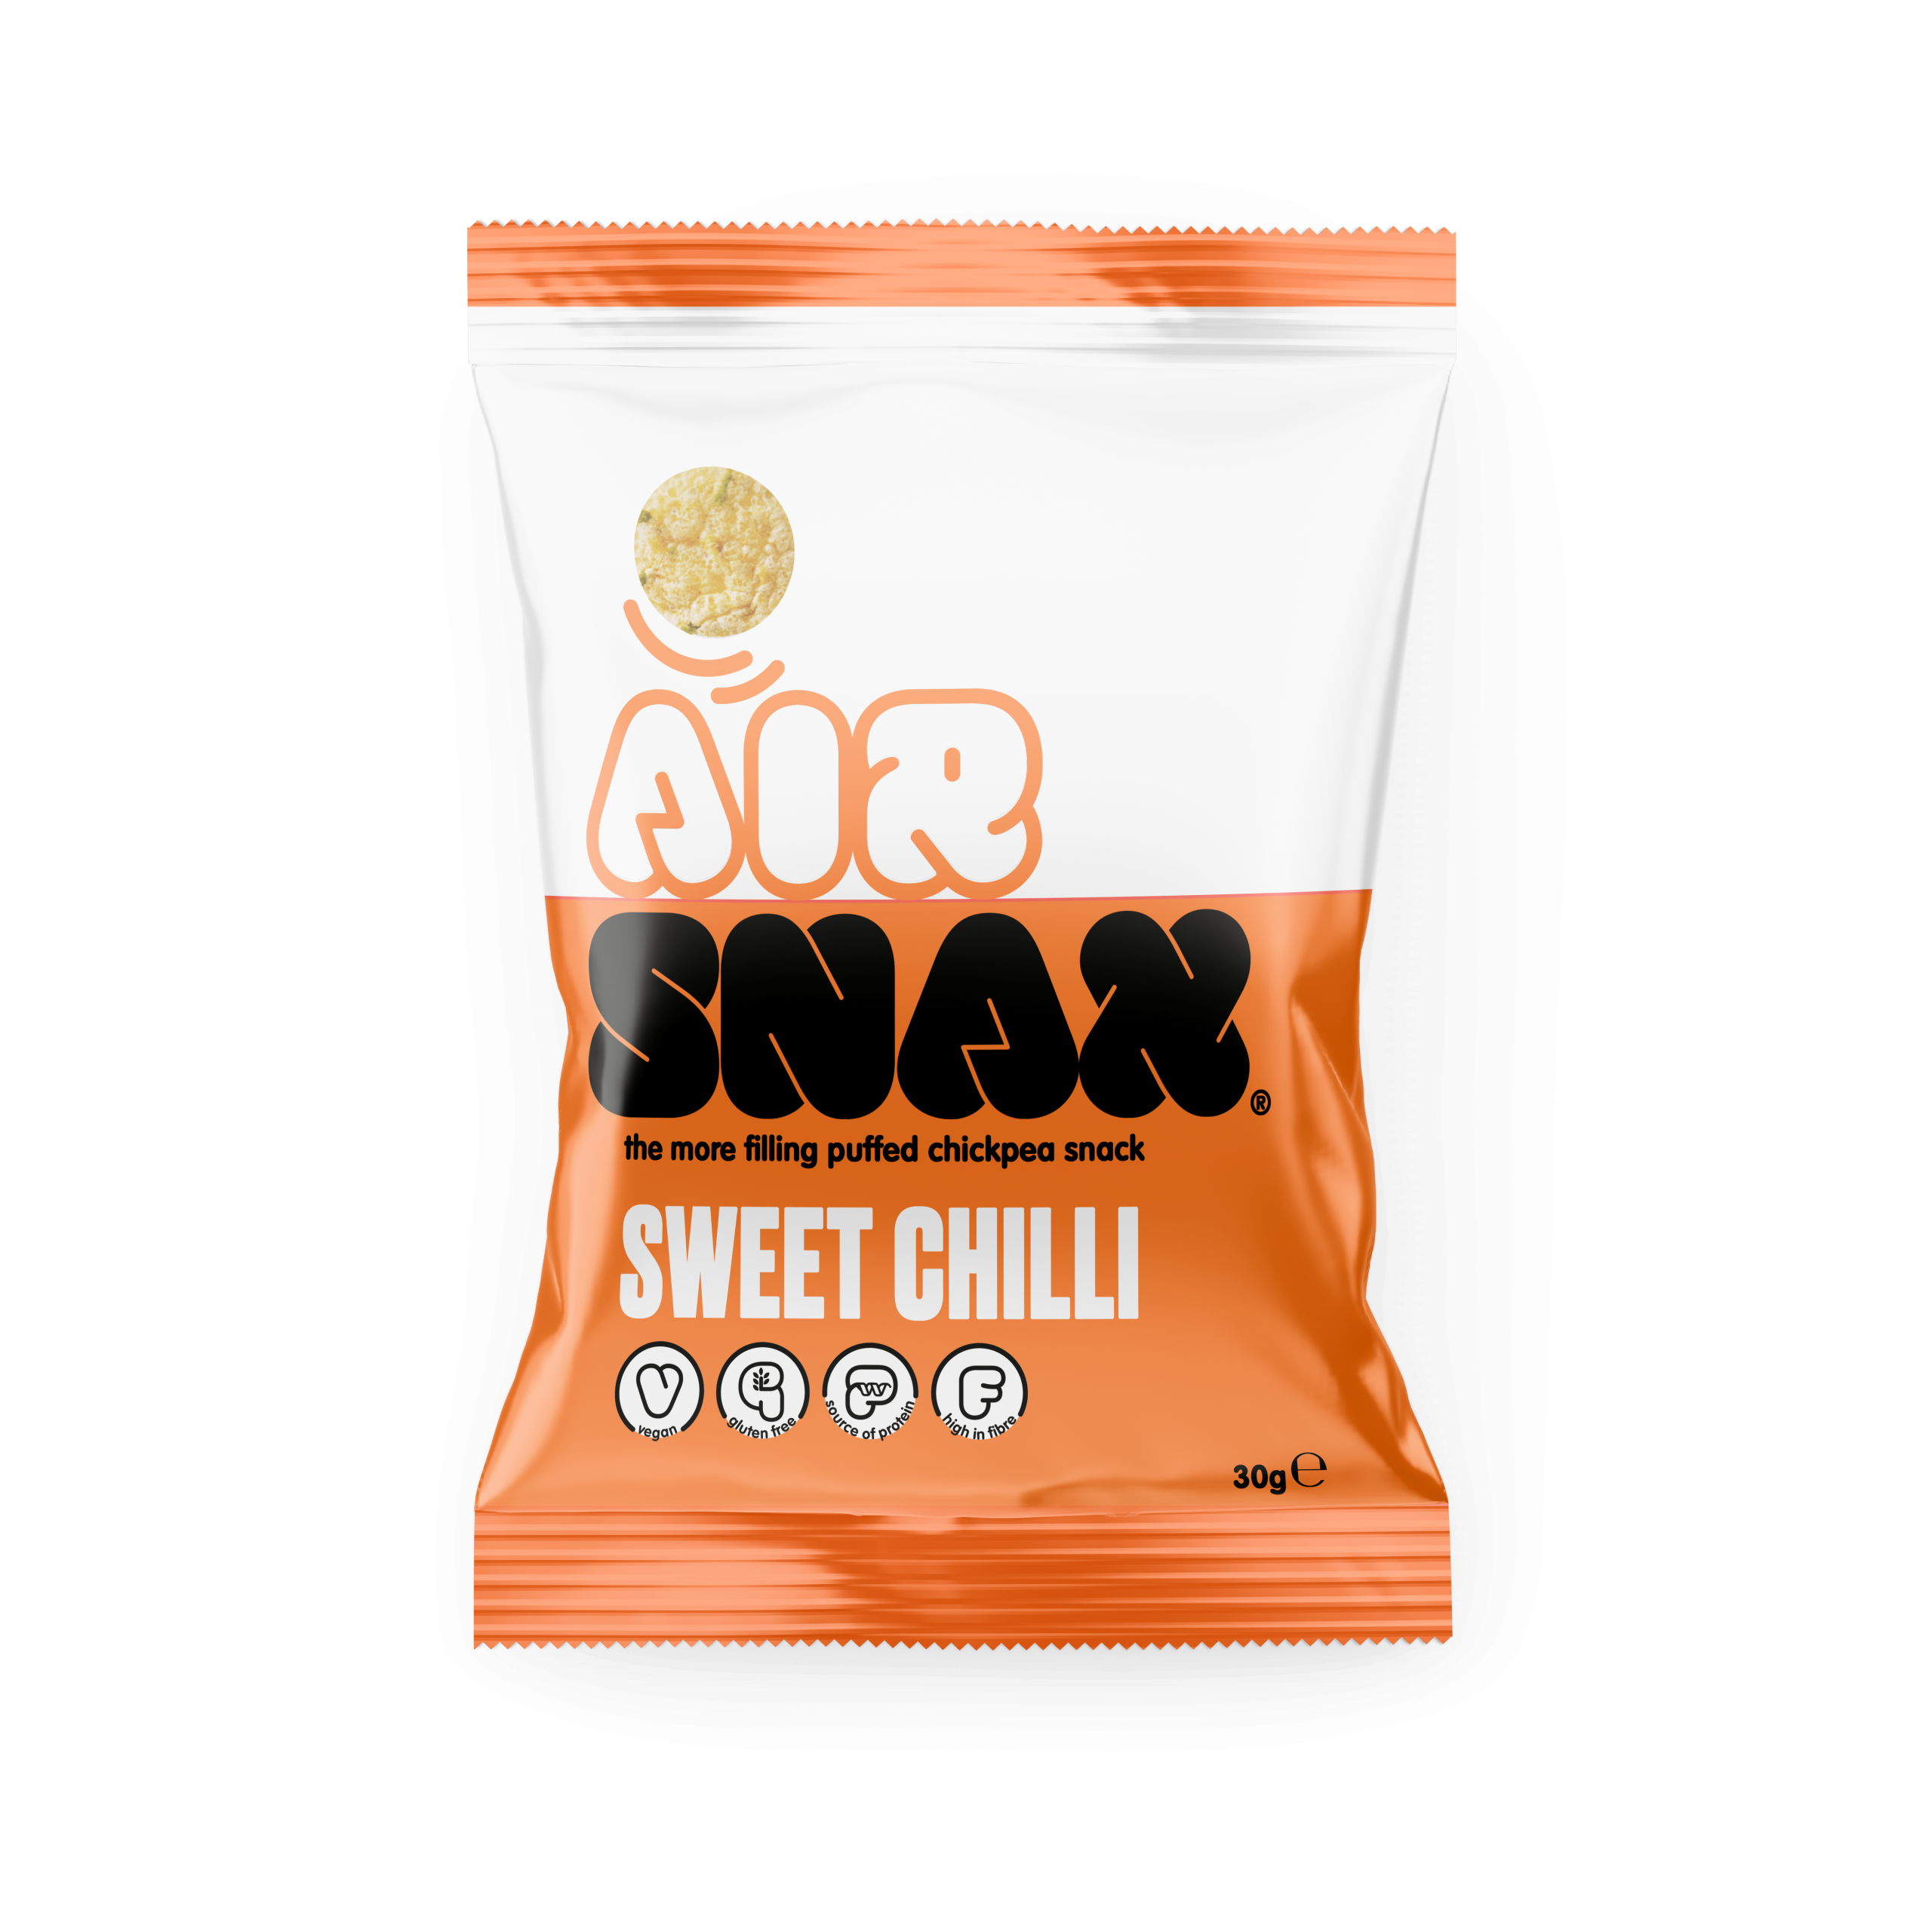 AirSnax enters UK snacks market with new puffed chickpea range